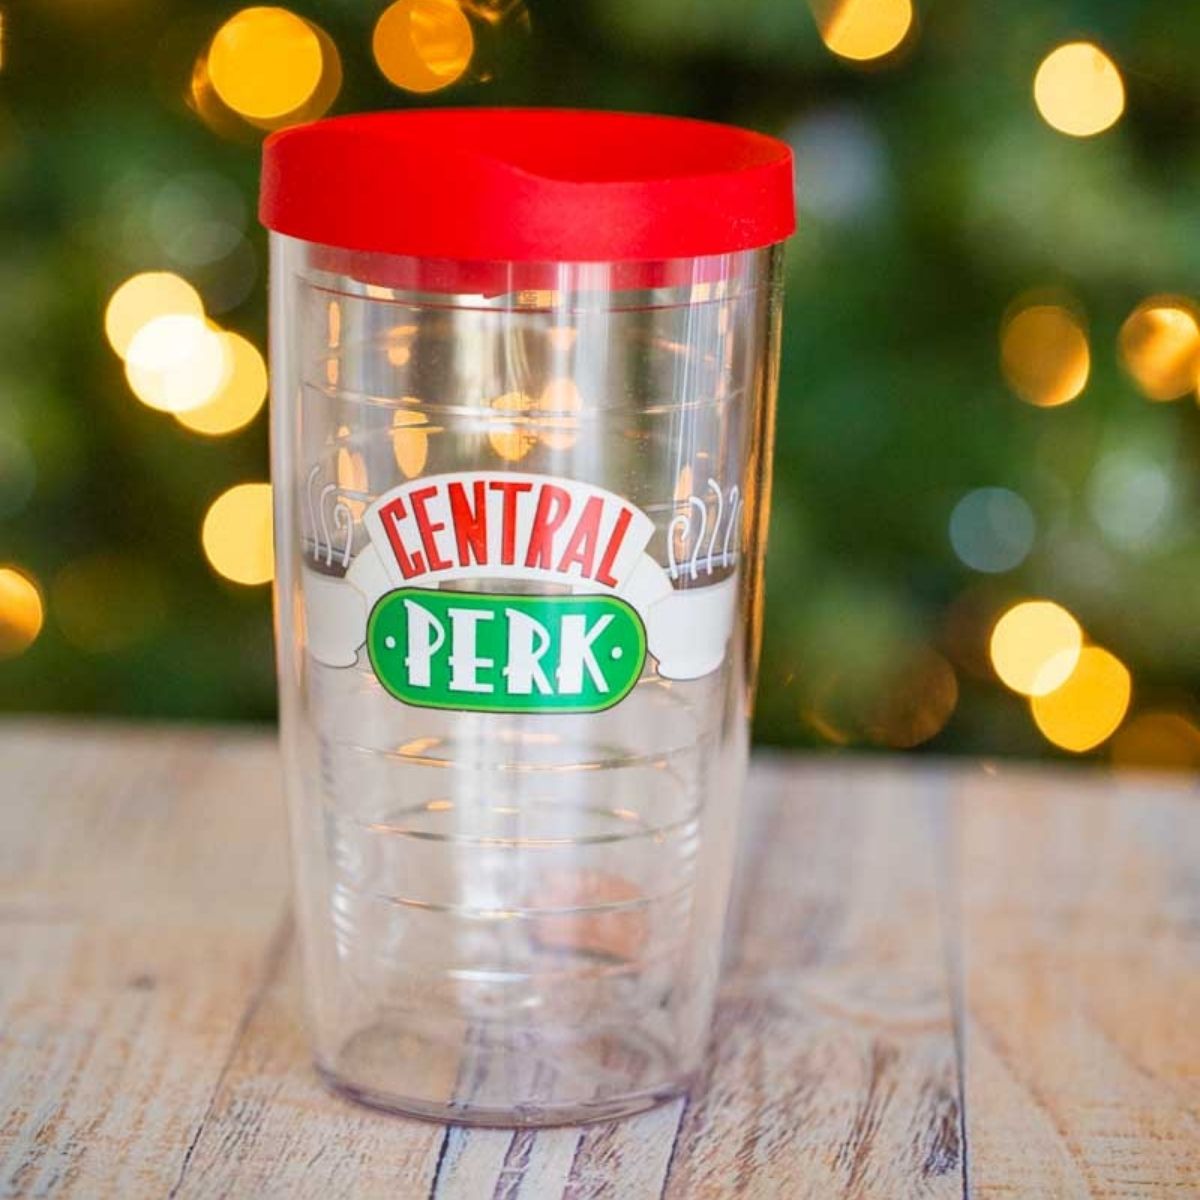 A Central Perk "Friends" tumbler in front of a Christmas tree.